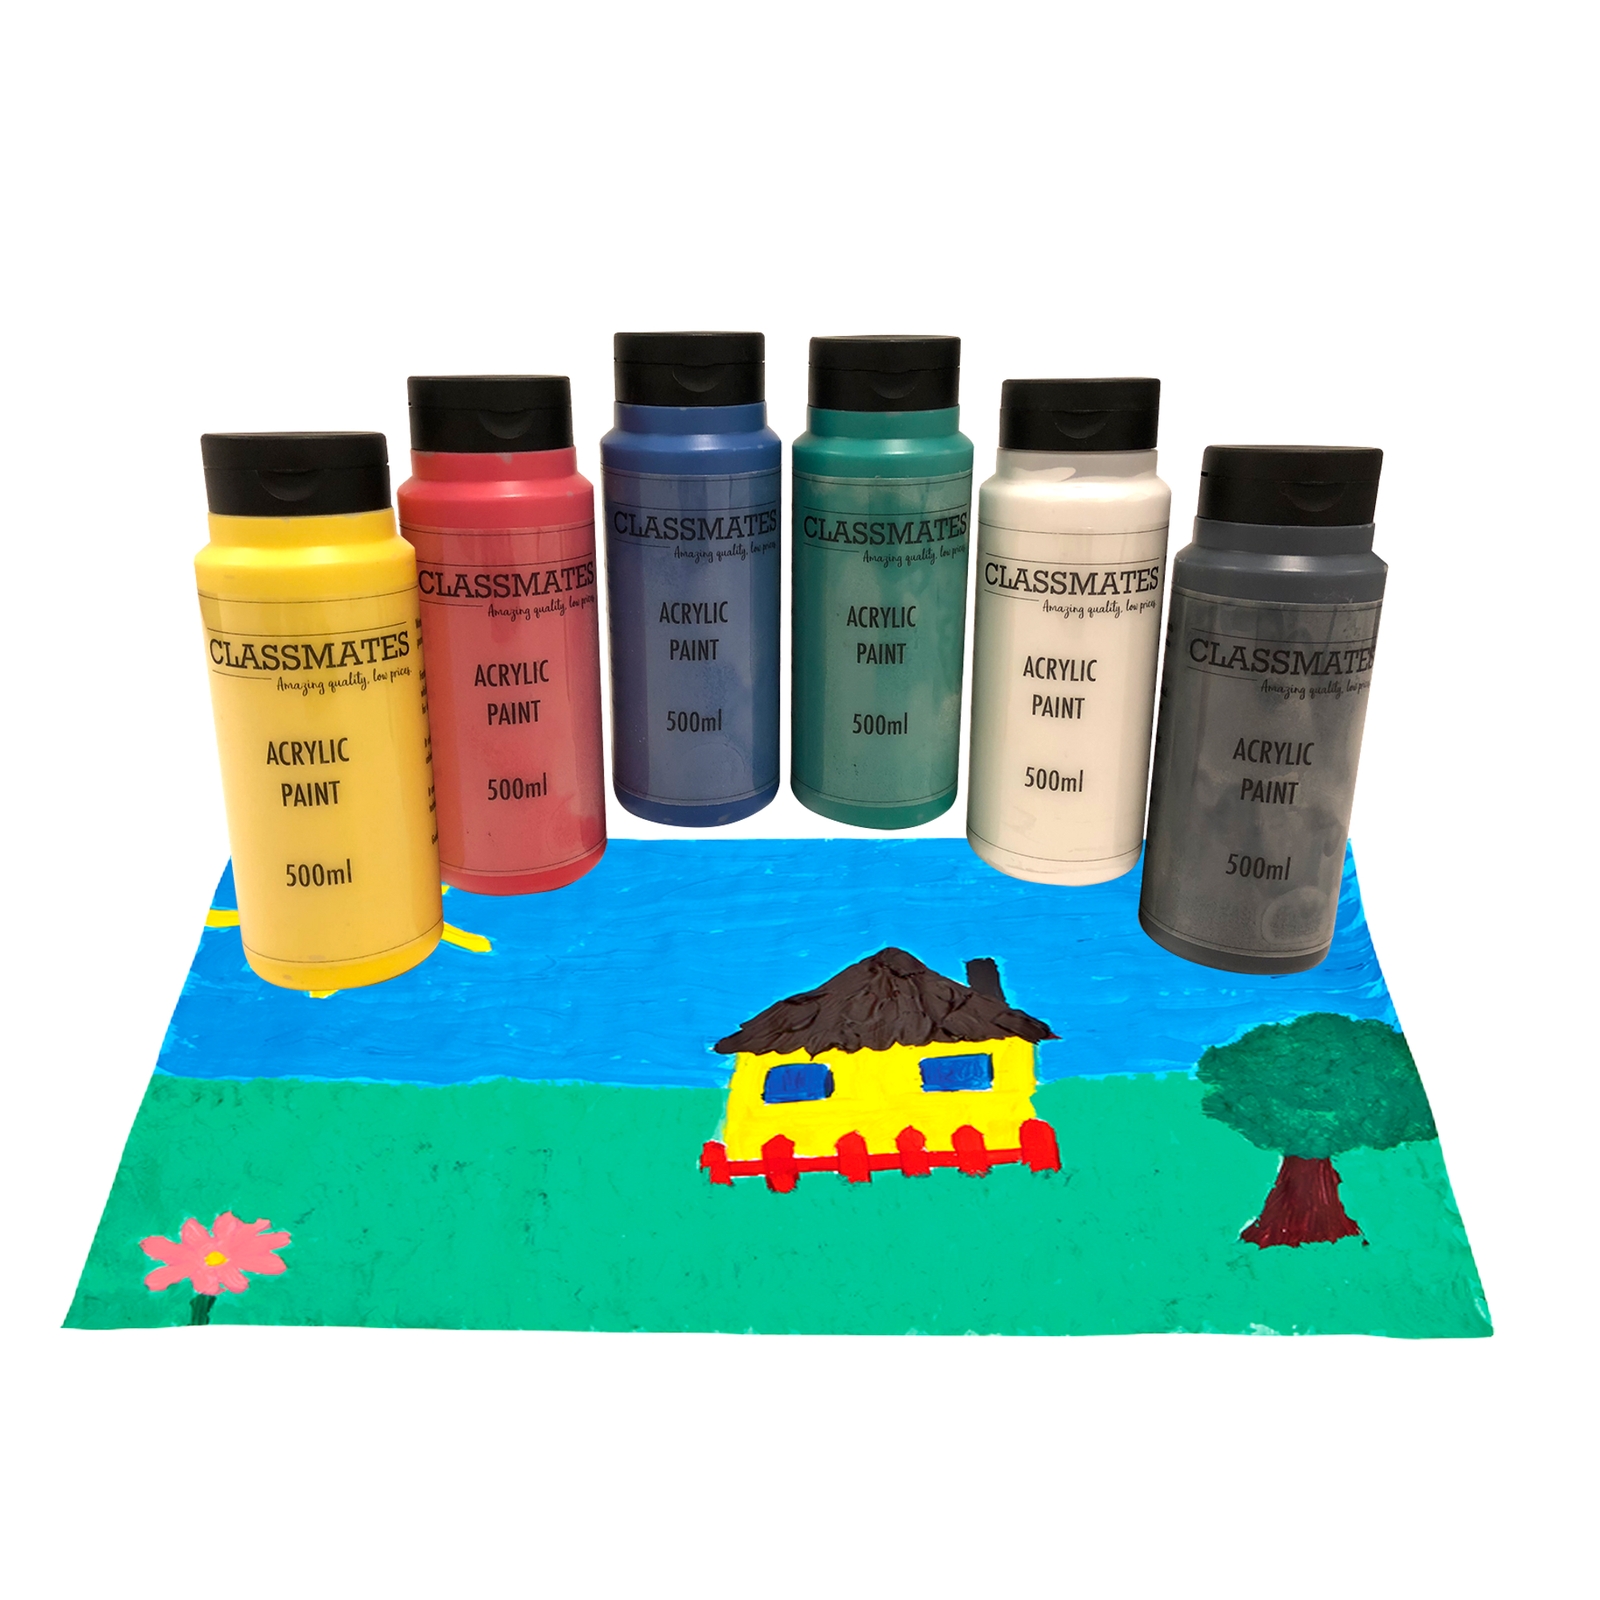 Classmates Acrylic Paint in Assorted - Pack of 6 - 500ml Bottle